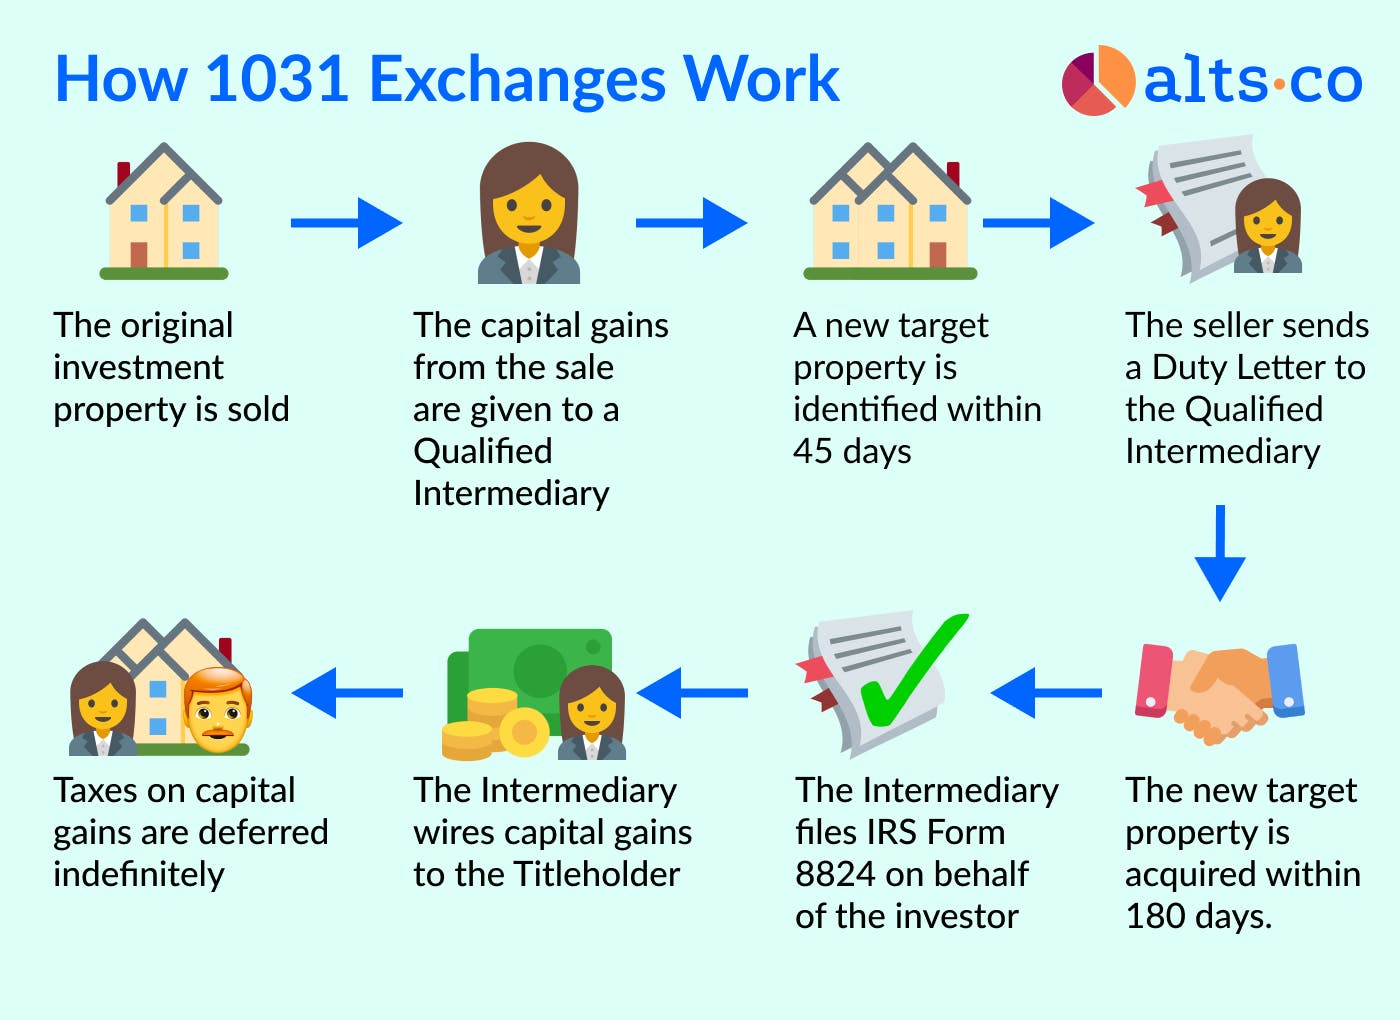 how 1031 exchanges work graphic